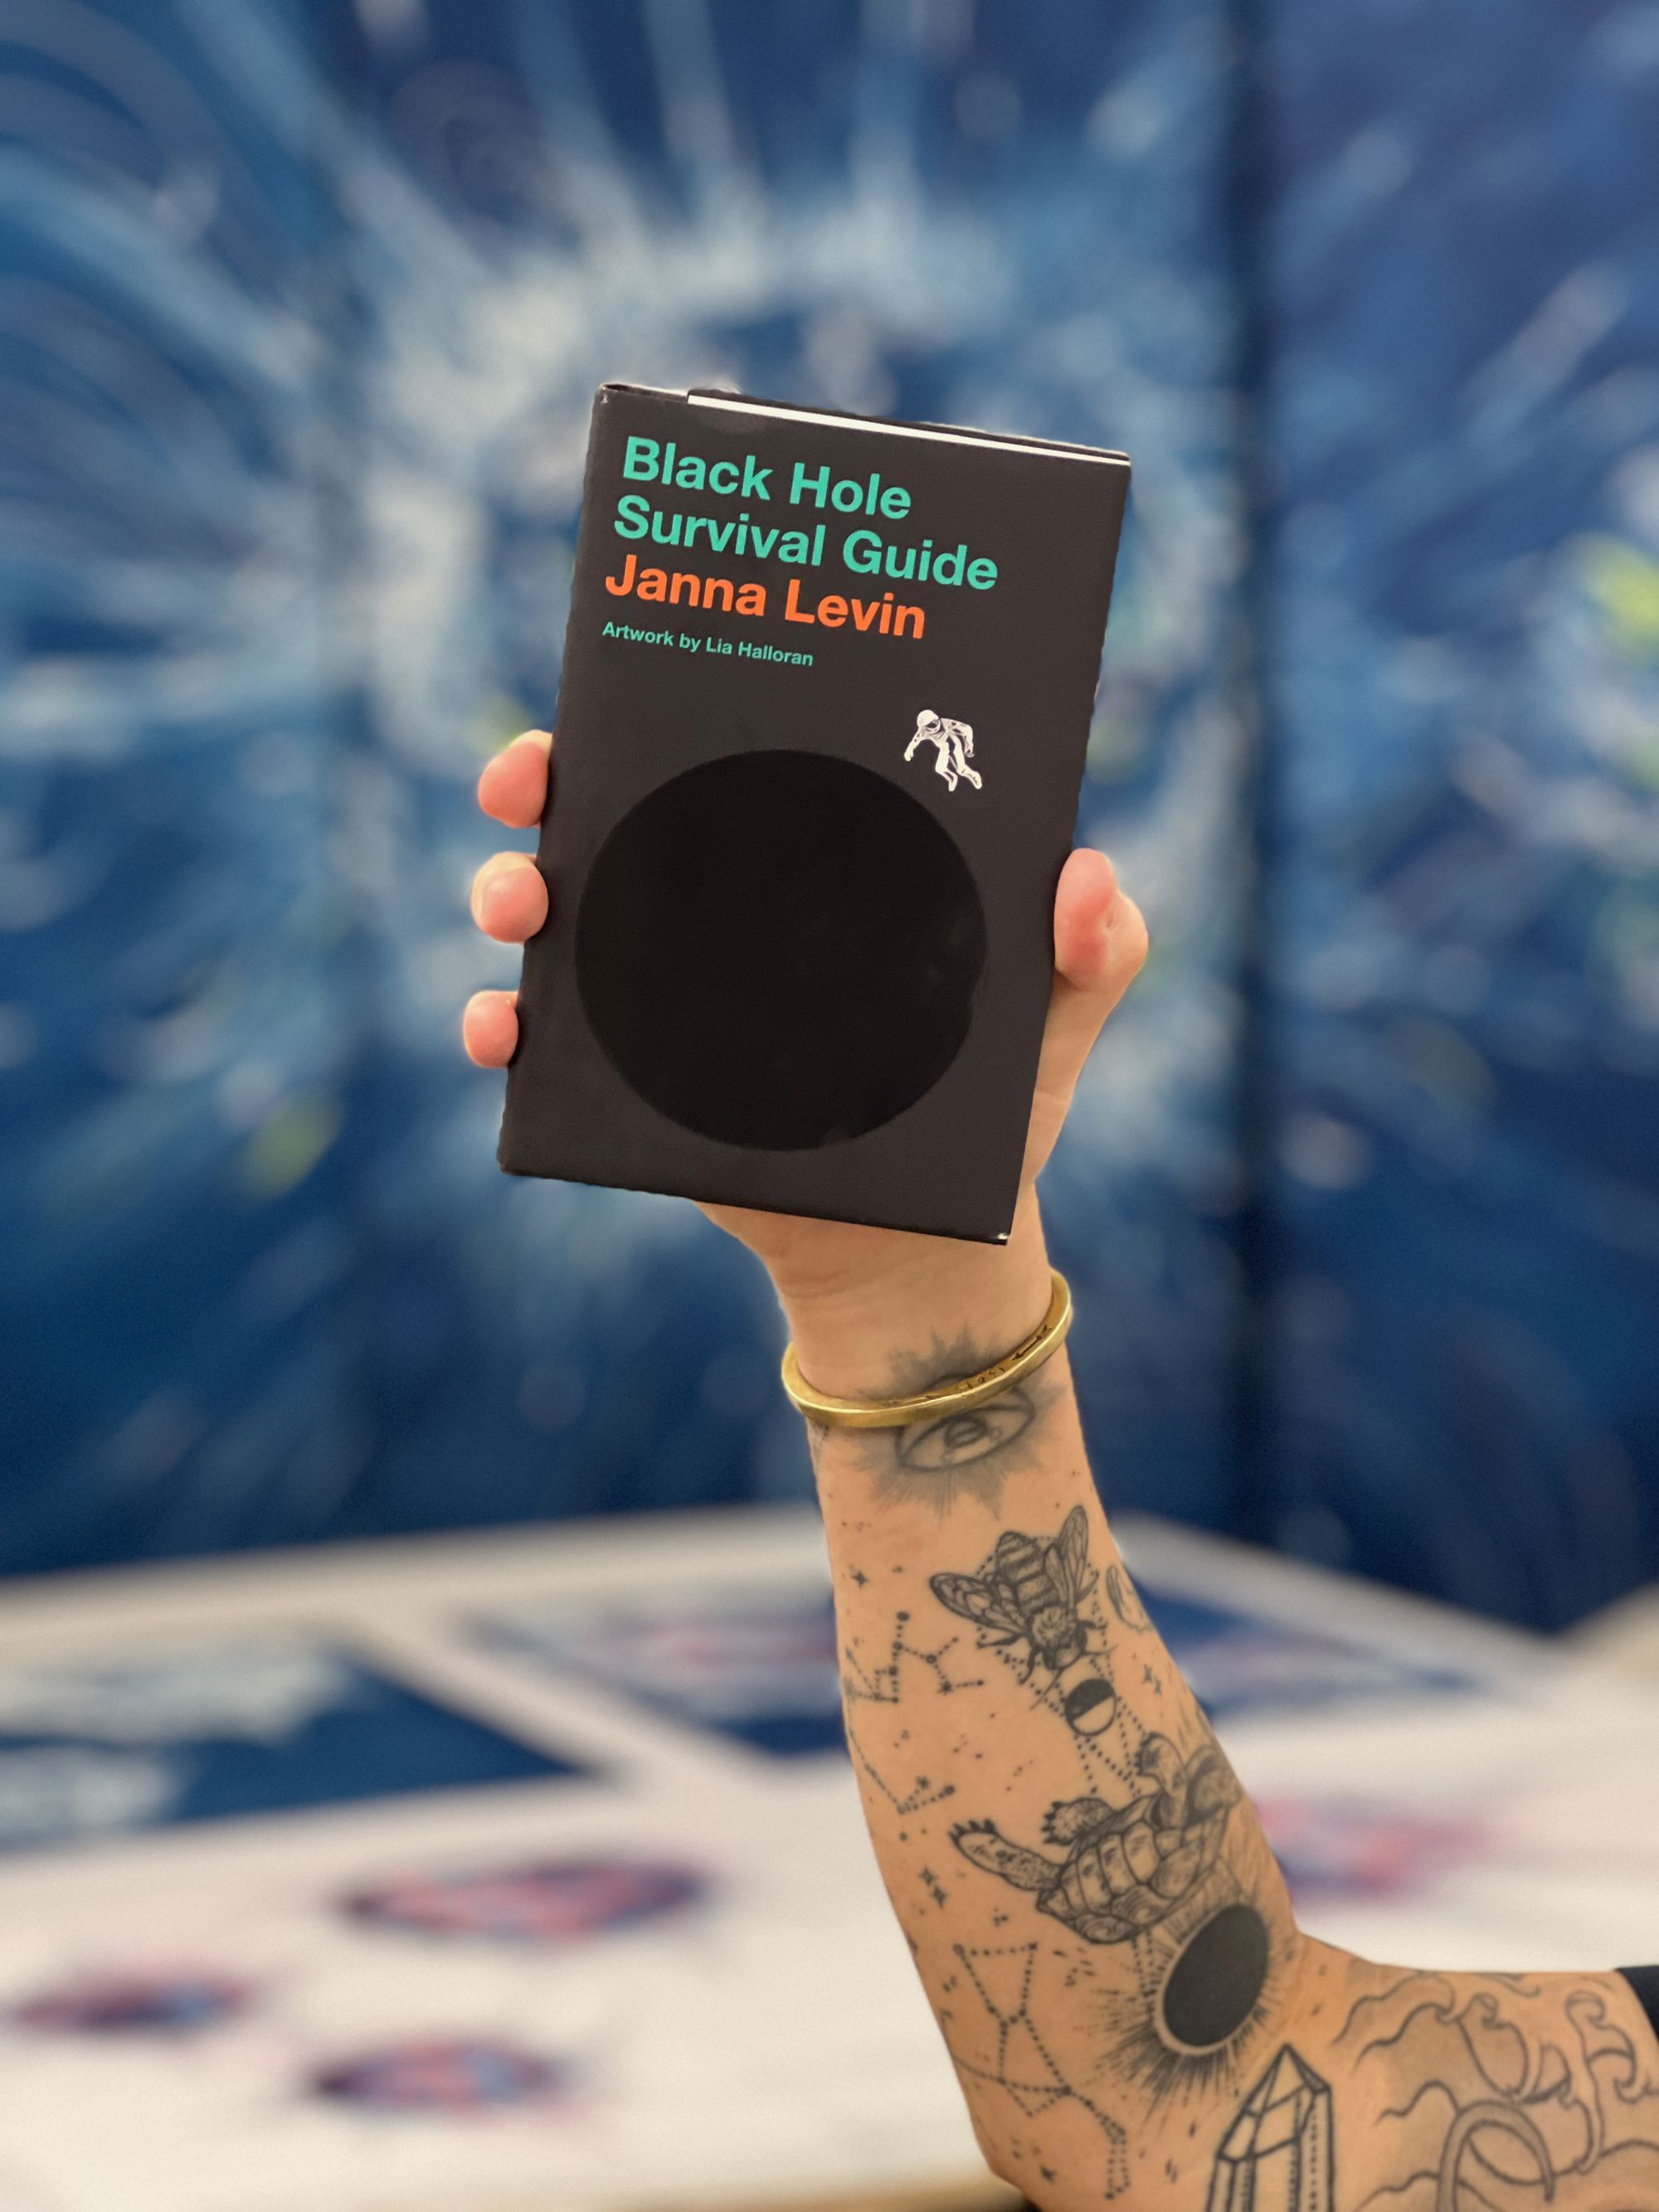 A tattooed arm holding up a copy of the book, Black Hole Survival Guide